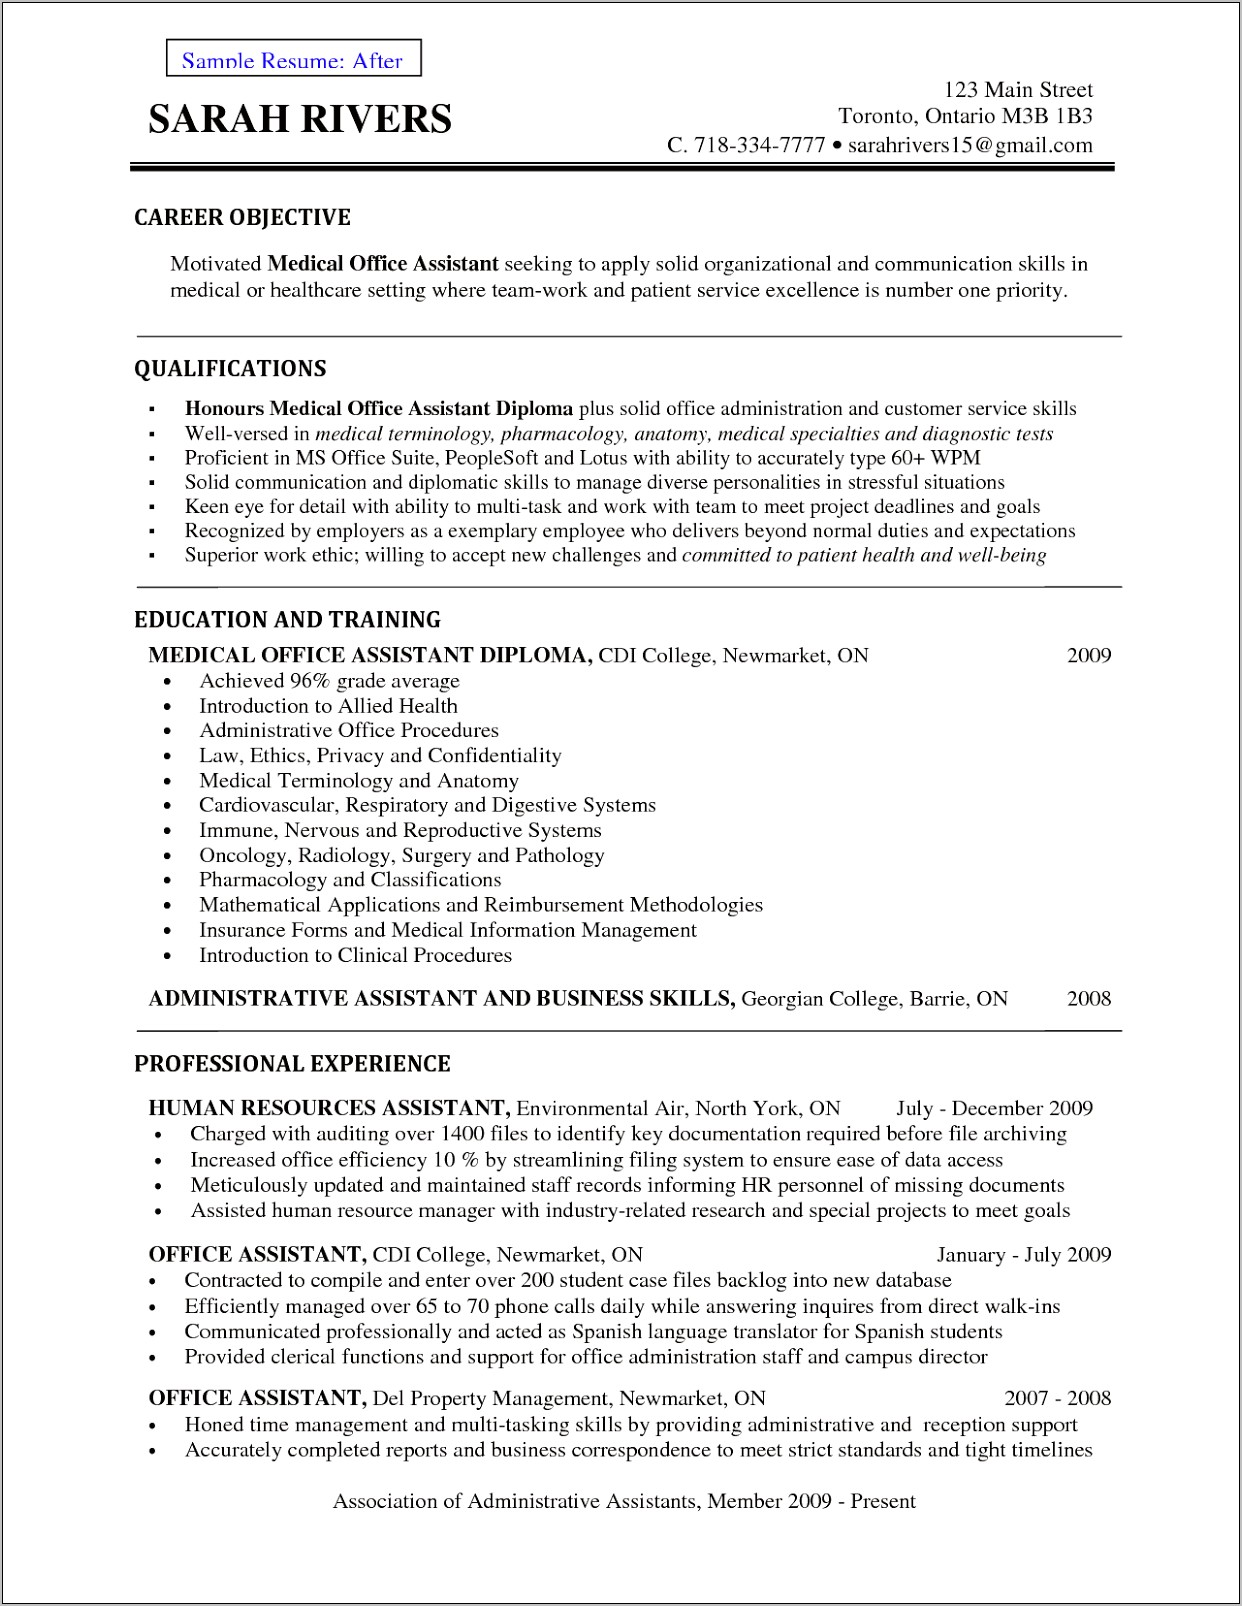 Samples Of Functional Resume For Medical Assistant